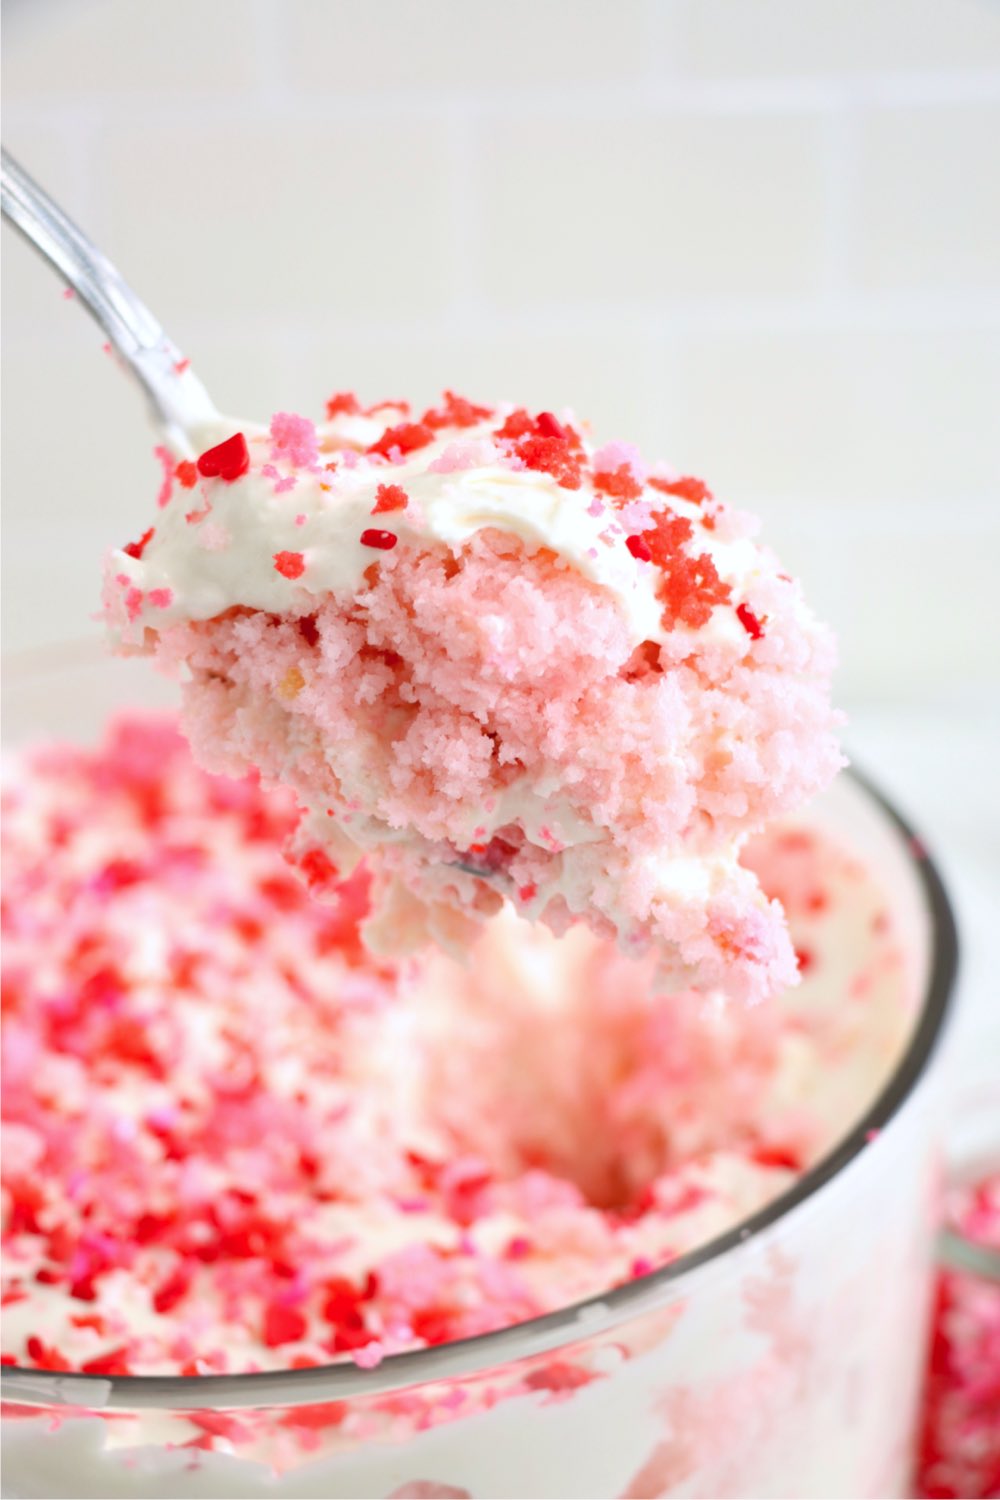 scoop of pink and red trifle dessert